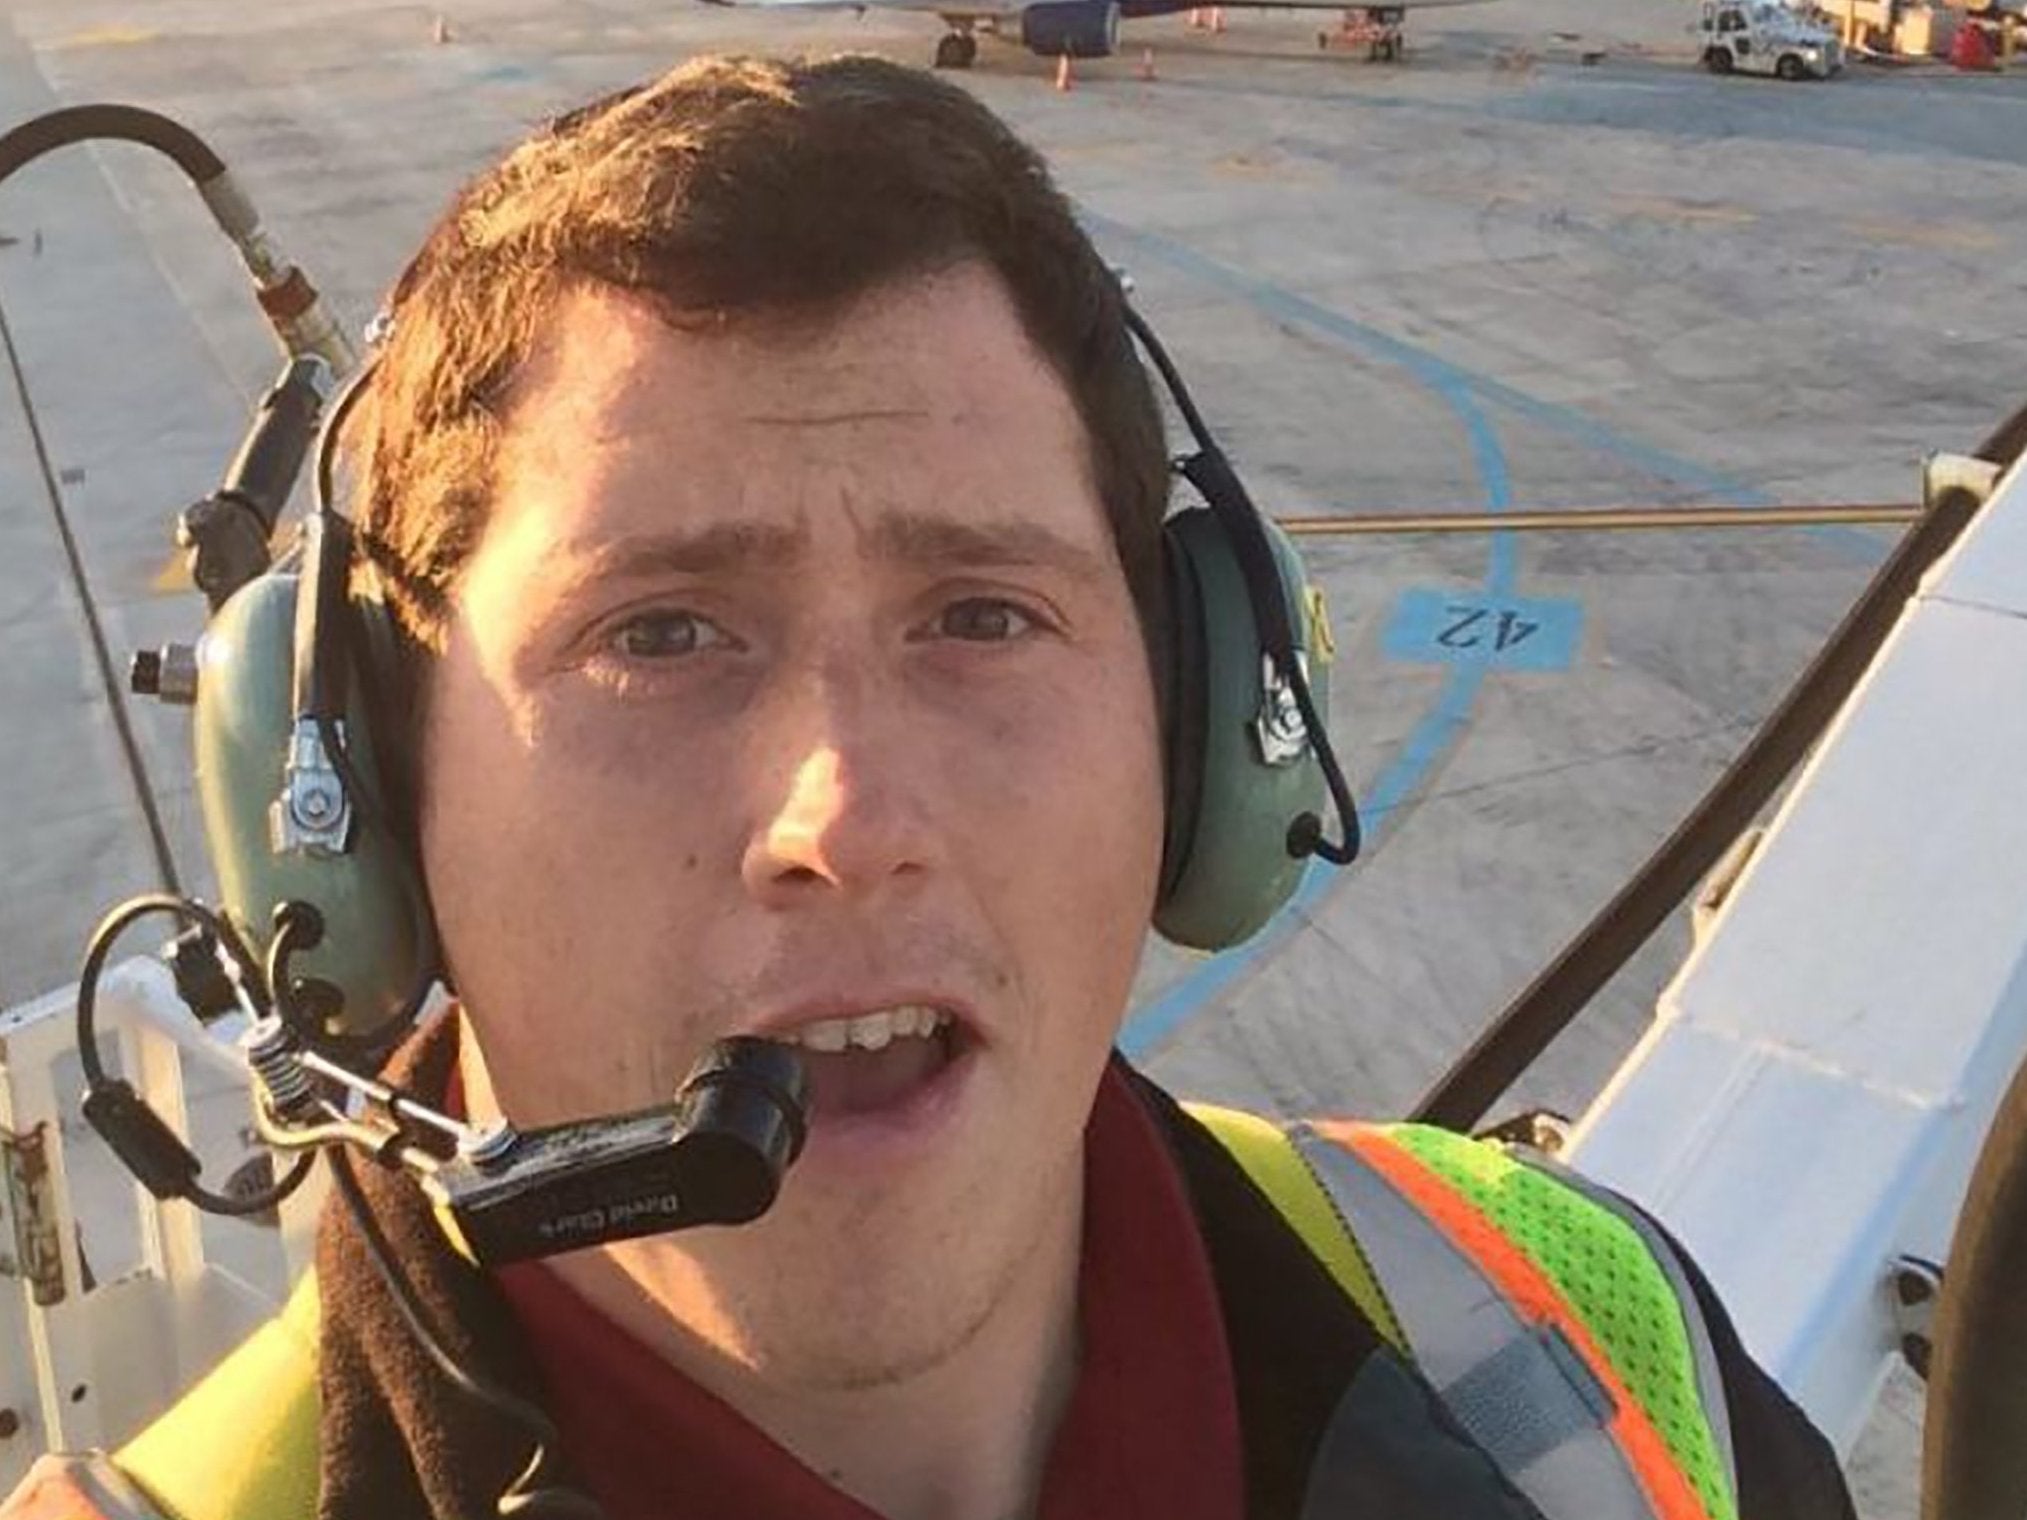 Richard Russell hijacked a plane from an airport in Seattle before crashing an hour later (AFP/Getty Images)